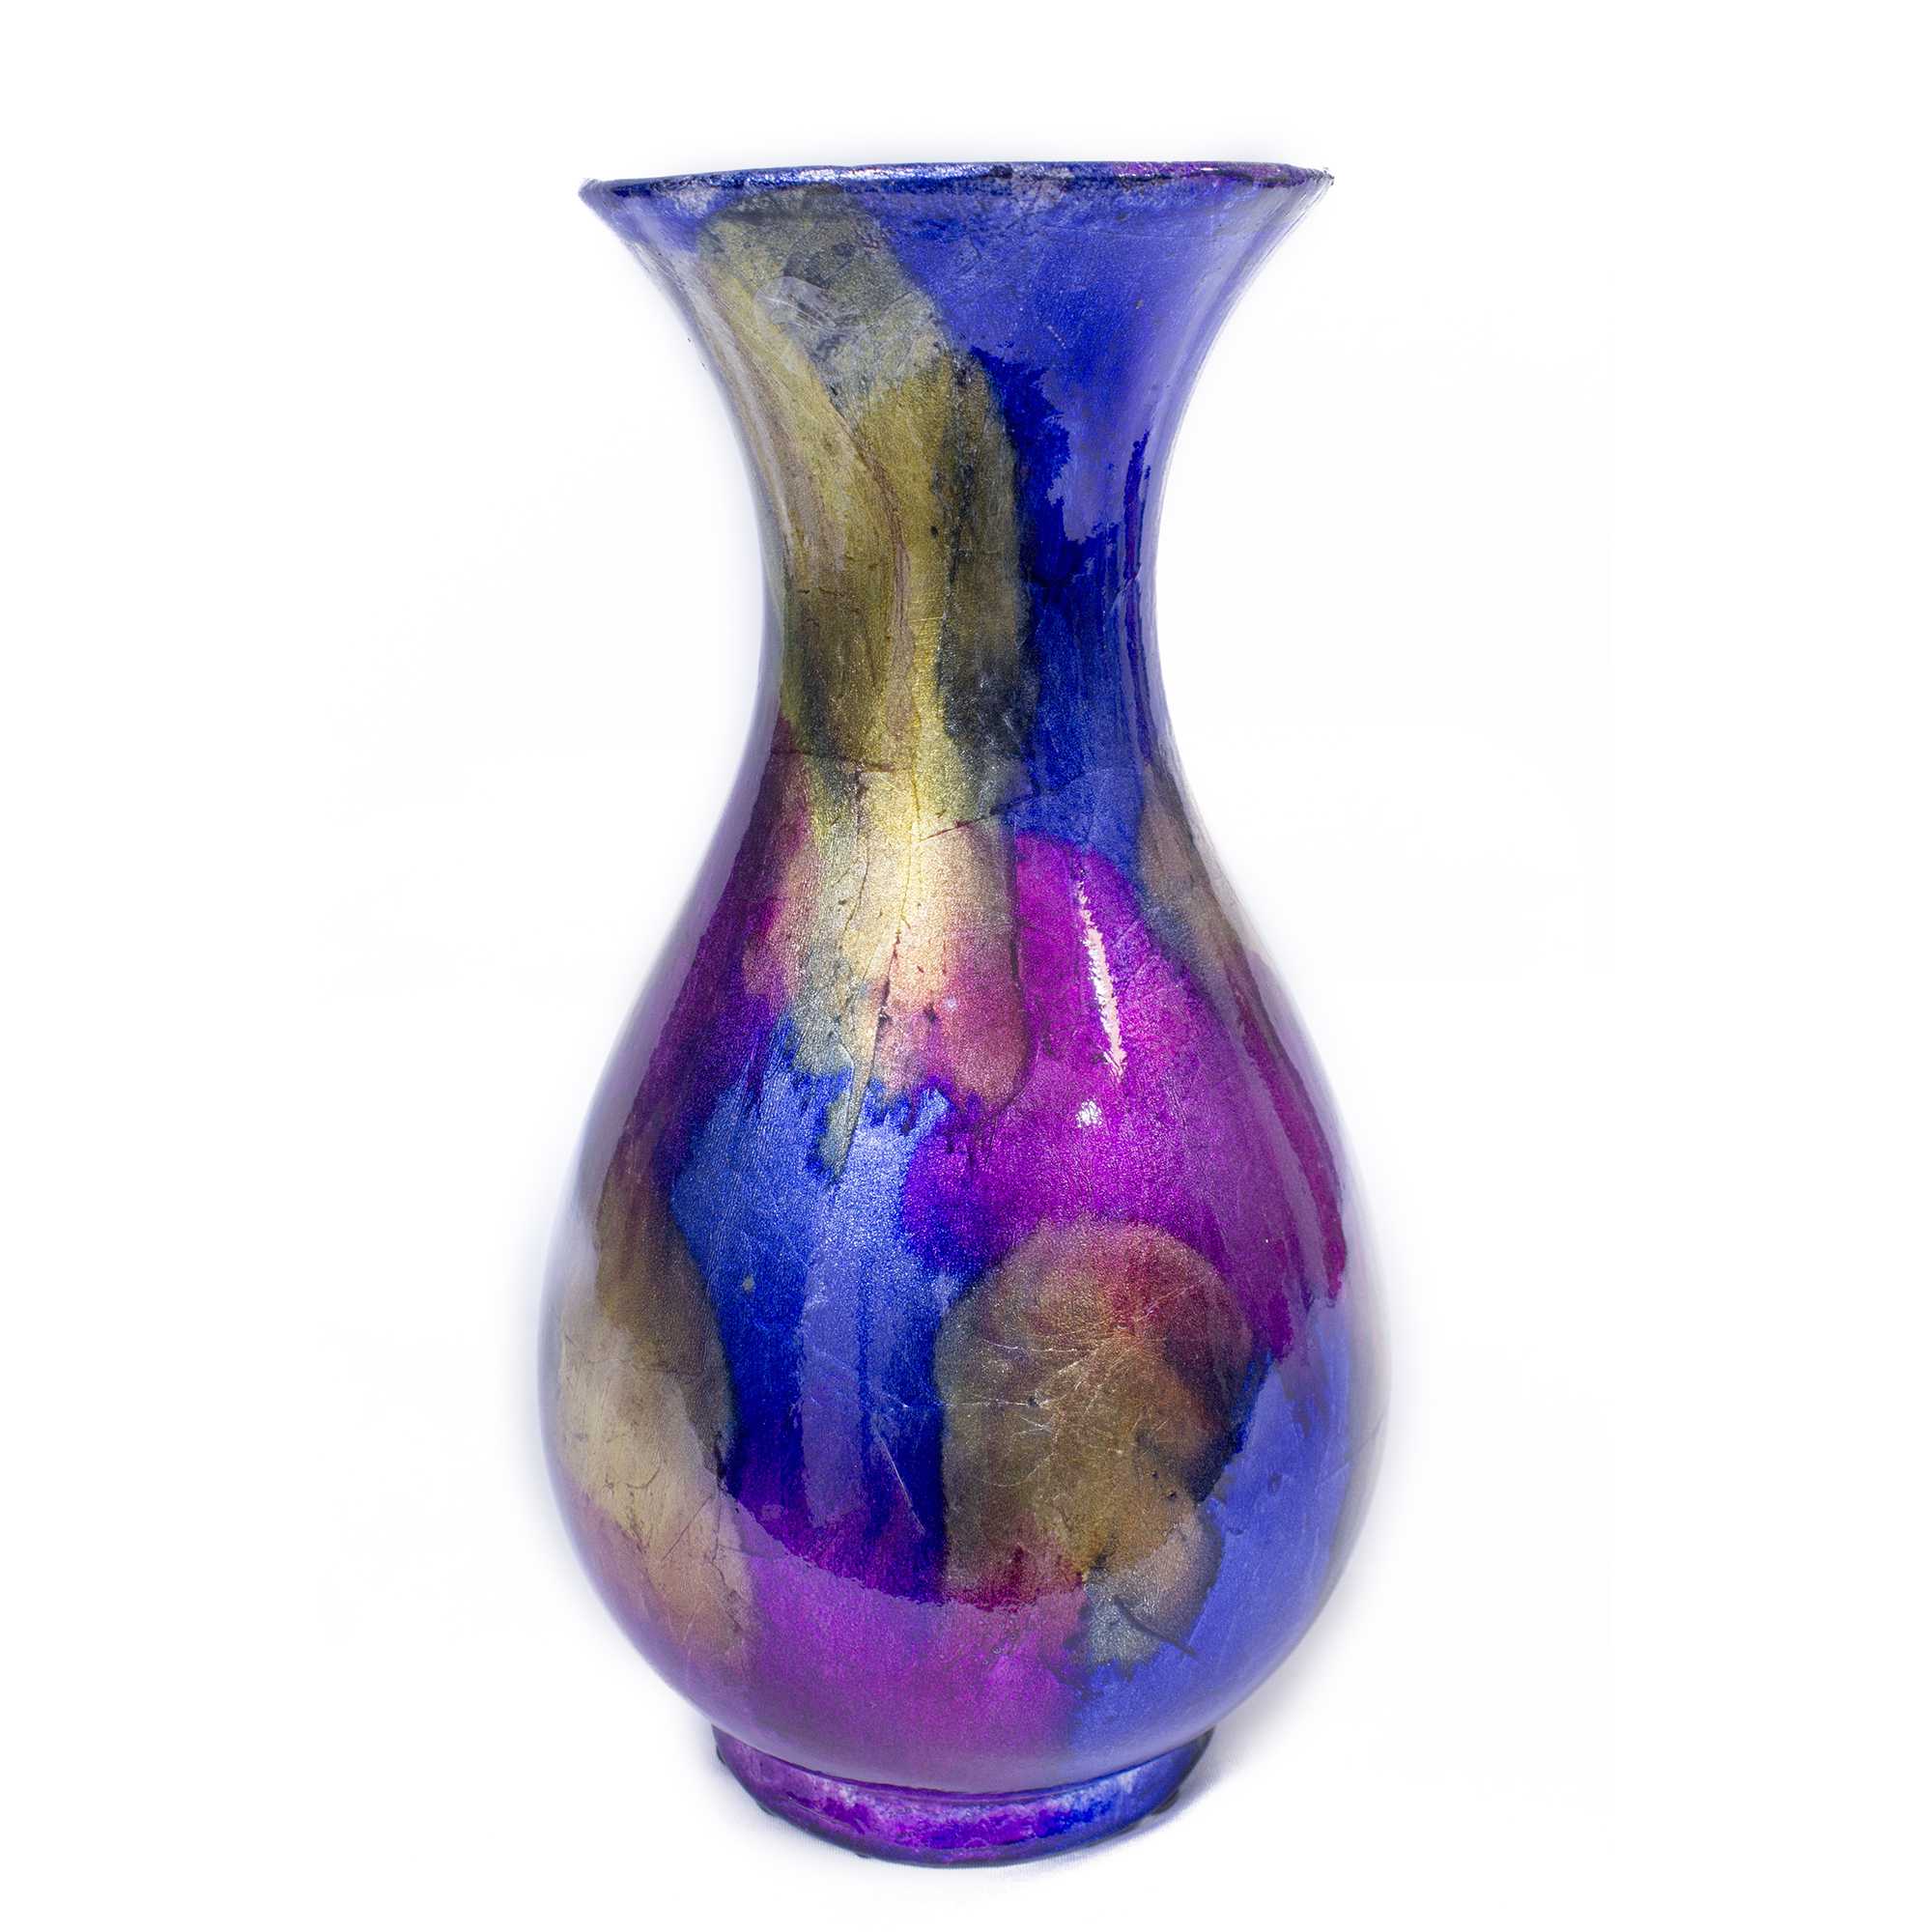 6.25" X 6.25" X 12.75" Blue Yellow Purple Ceramic Foiled and Lacquered Trumpet Vase